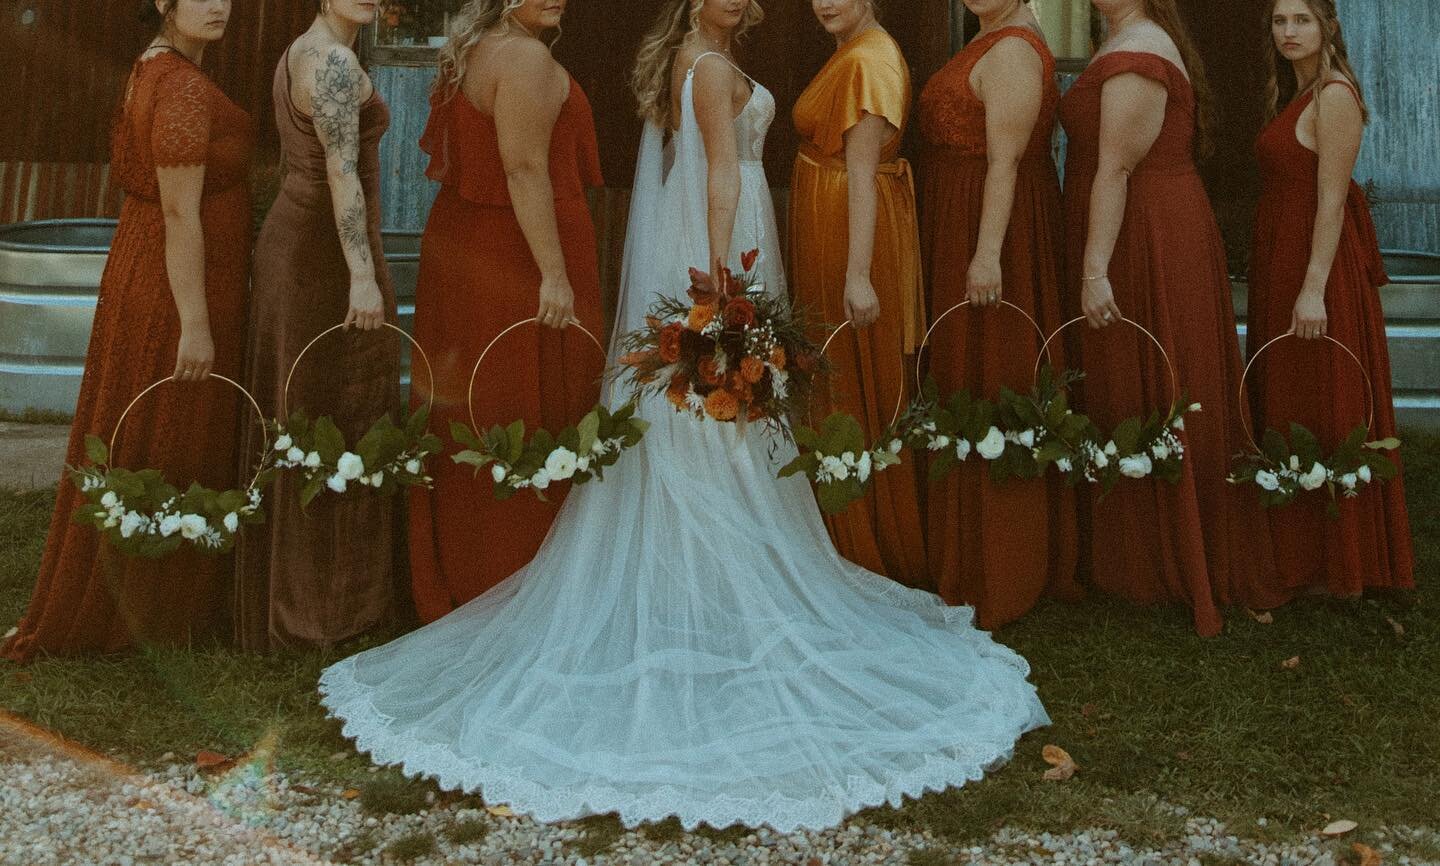 Moody, fall wedding vibes 🖤 

question-did you do traditional bridesmaid bouquets? Or something different like Jenna?! Love all the unique ideas, Lmk 👇